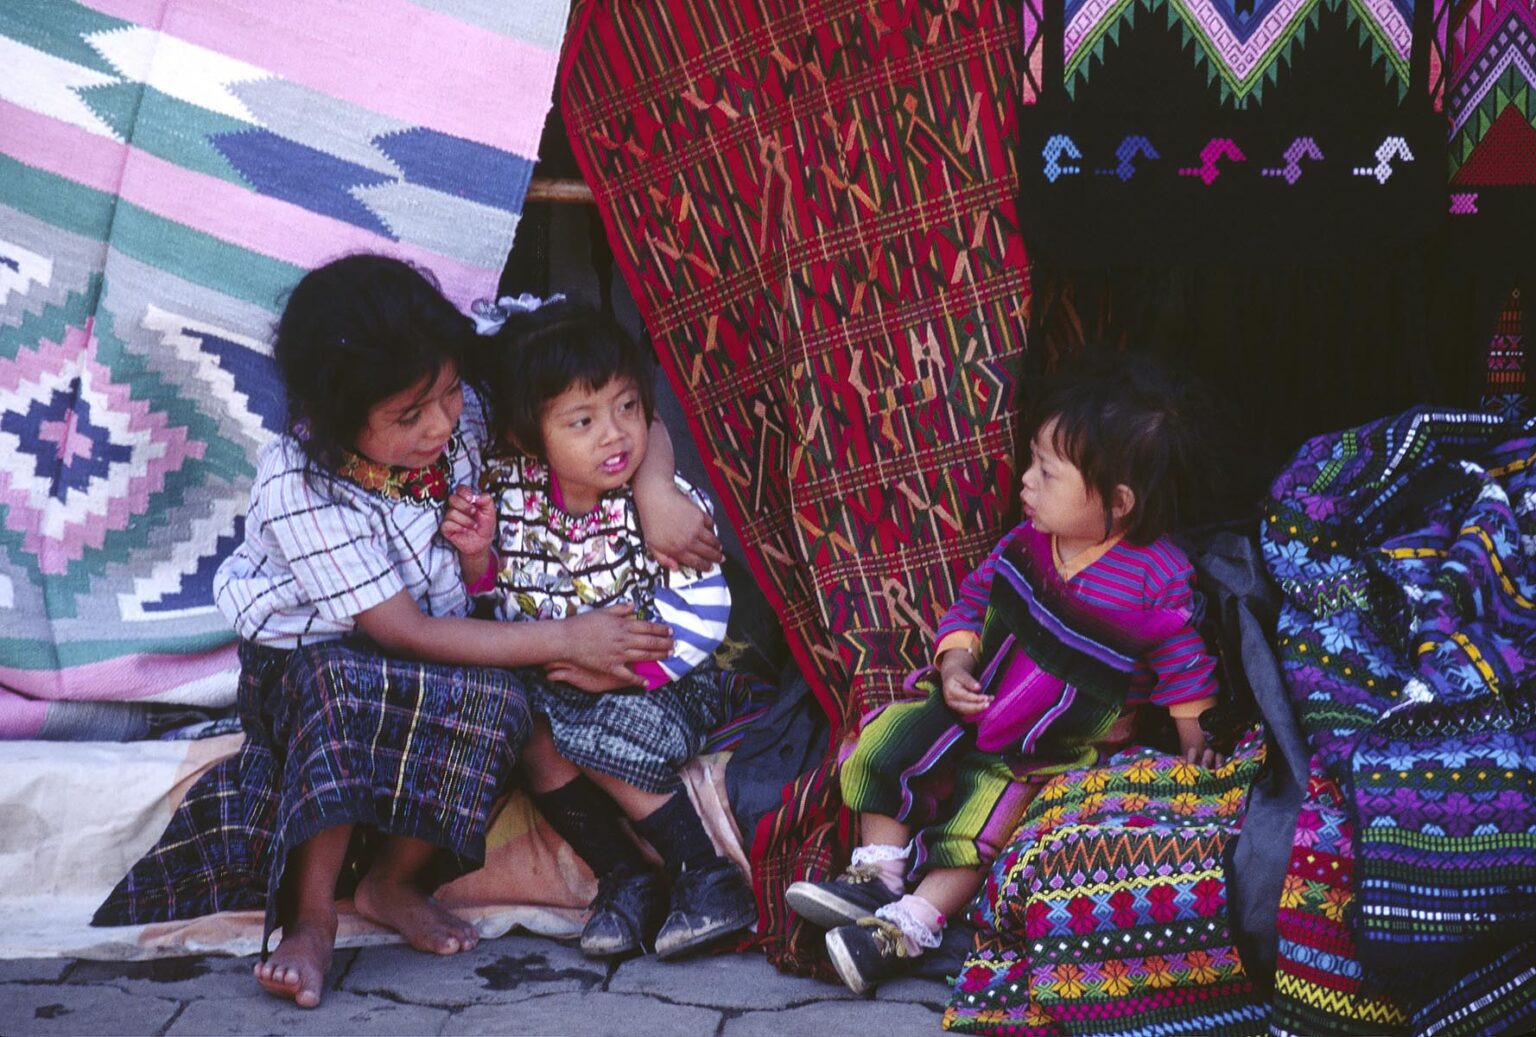 TZUTUJIL CHILDREN surrounded by handmade traditional TEXTILES for sale in the MARKETPLACE - SANTIAGO ATITLAN, GUATEMALA